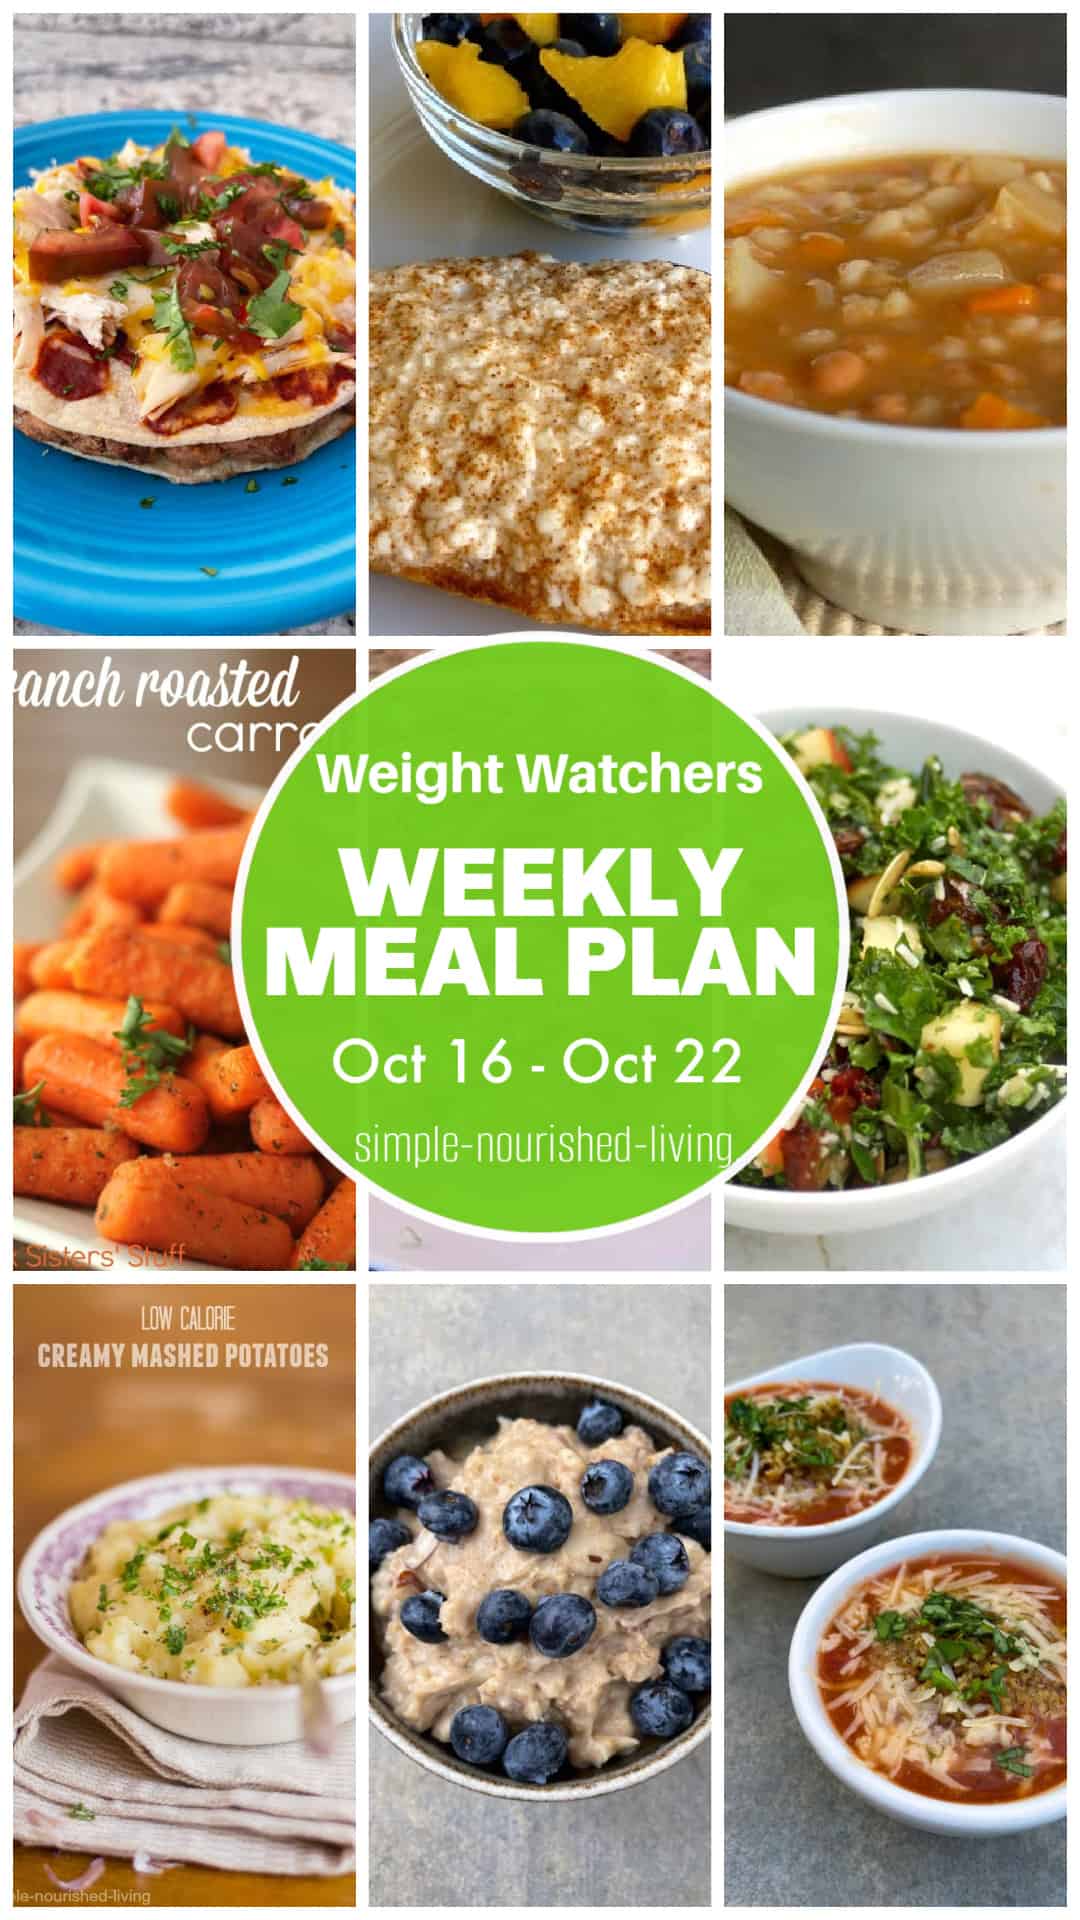 9 frame food photo collage: mexican skillet pizza, cottage cheese danish, bean barley soup, carrots, apple date salad, mashed potatoes, blueberry almond oatmeal, slow cooker chicken parmesan soup